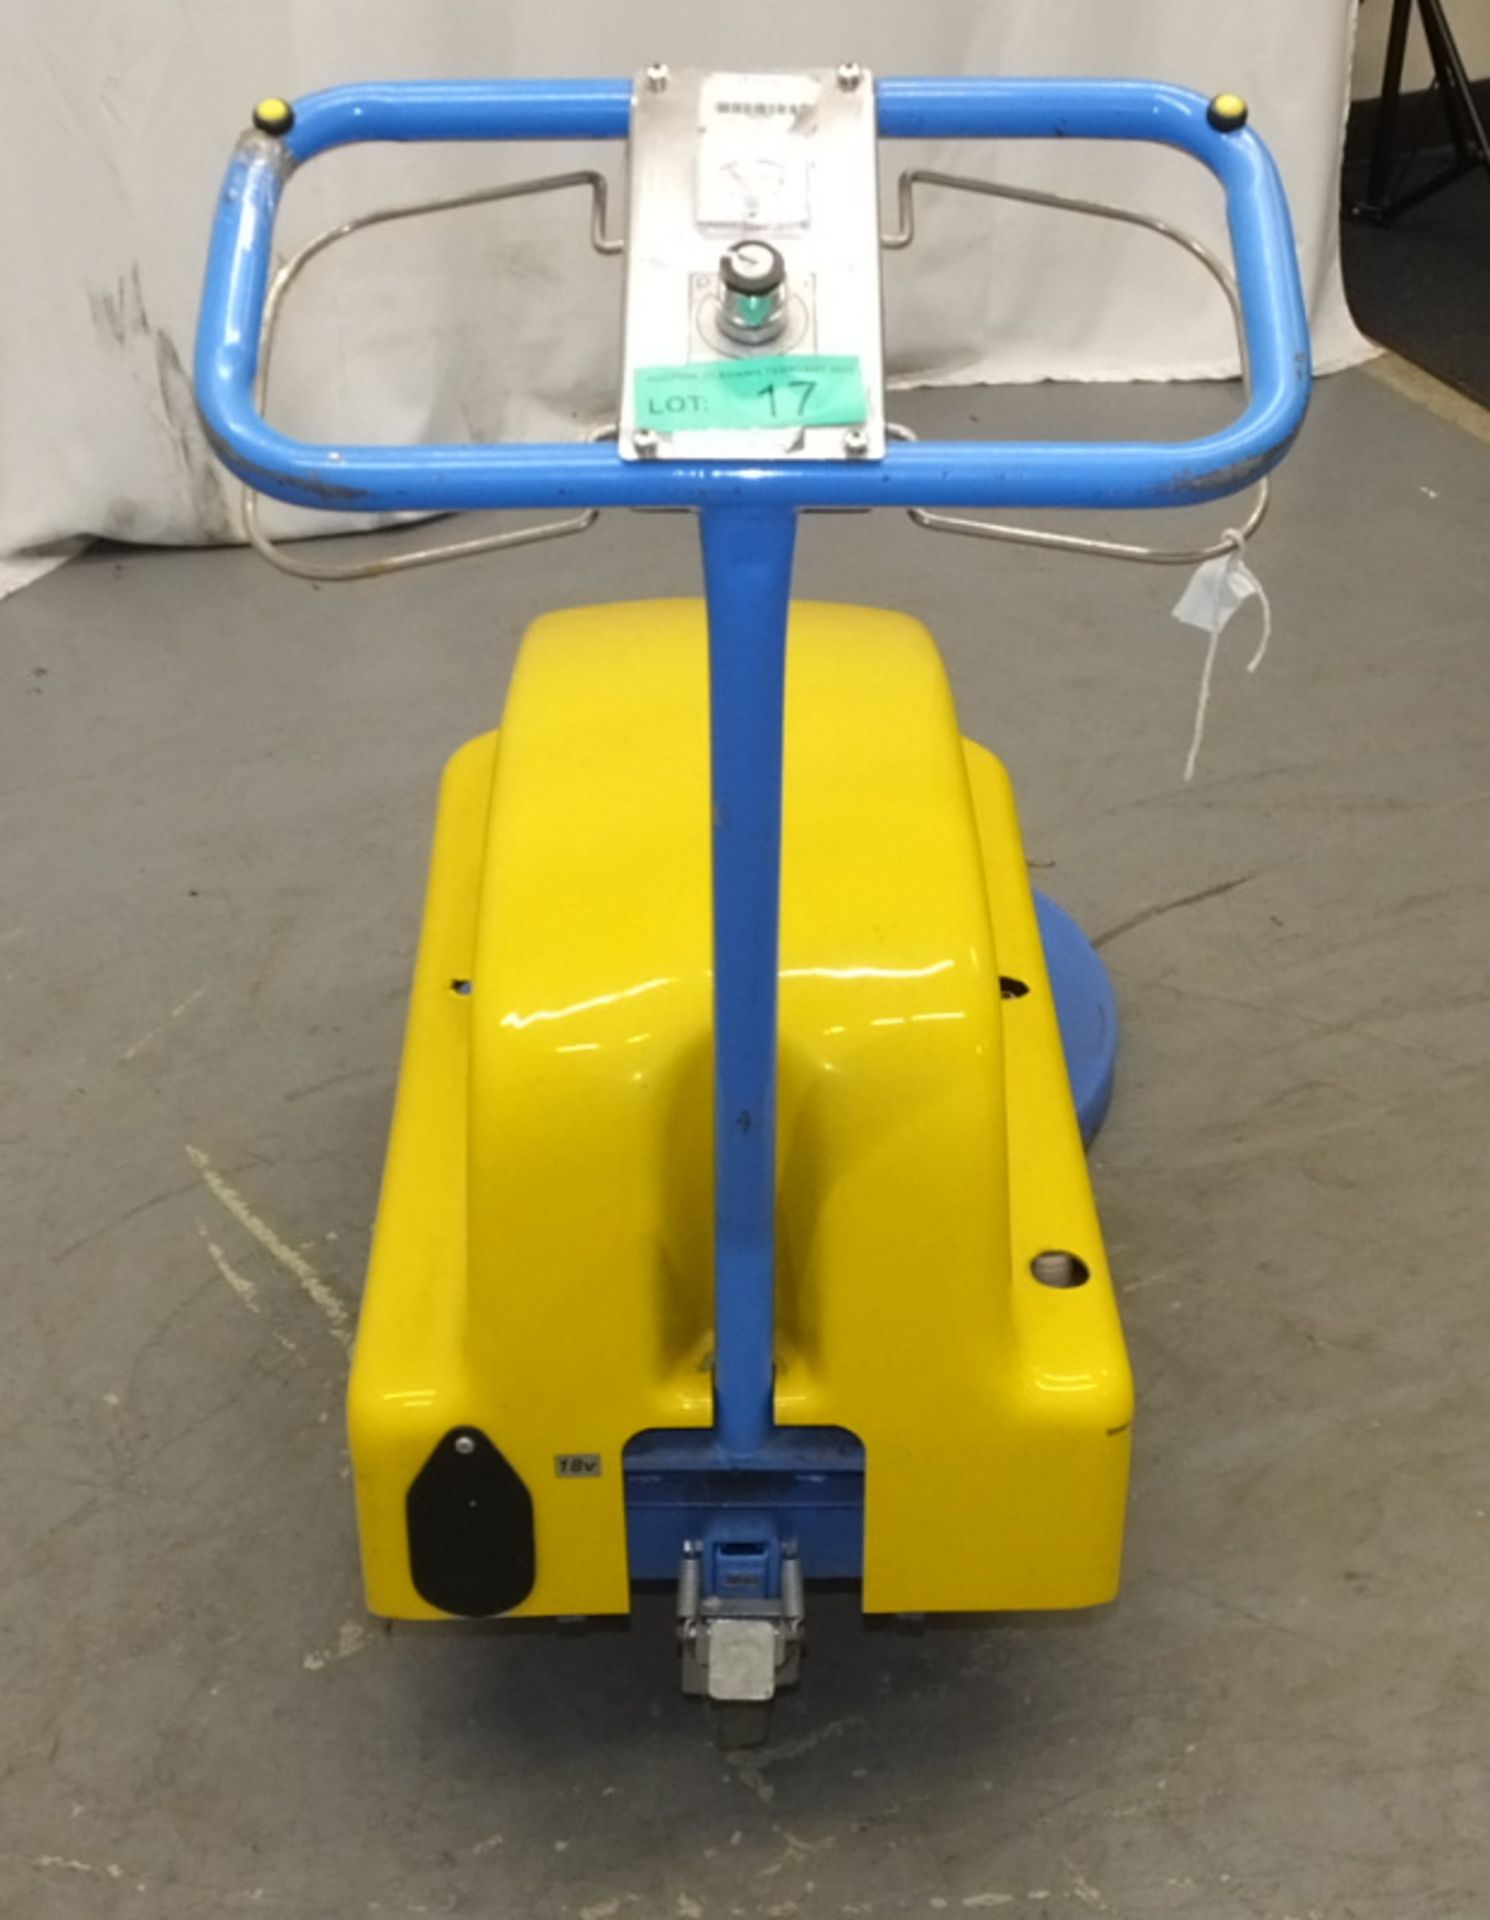 Tennant Challenger Nippy 500 Walk-Behind Floor Cleaner - no key - cracked casing as seen in pictures - Image 5 of 9